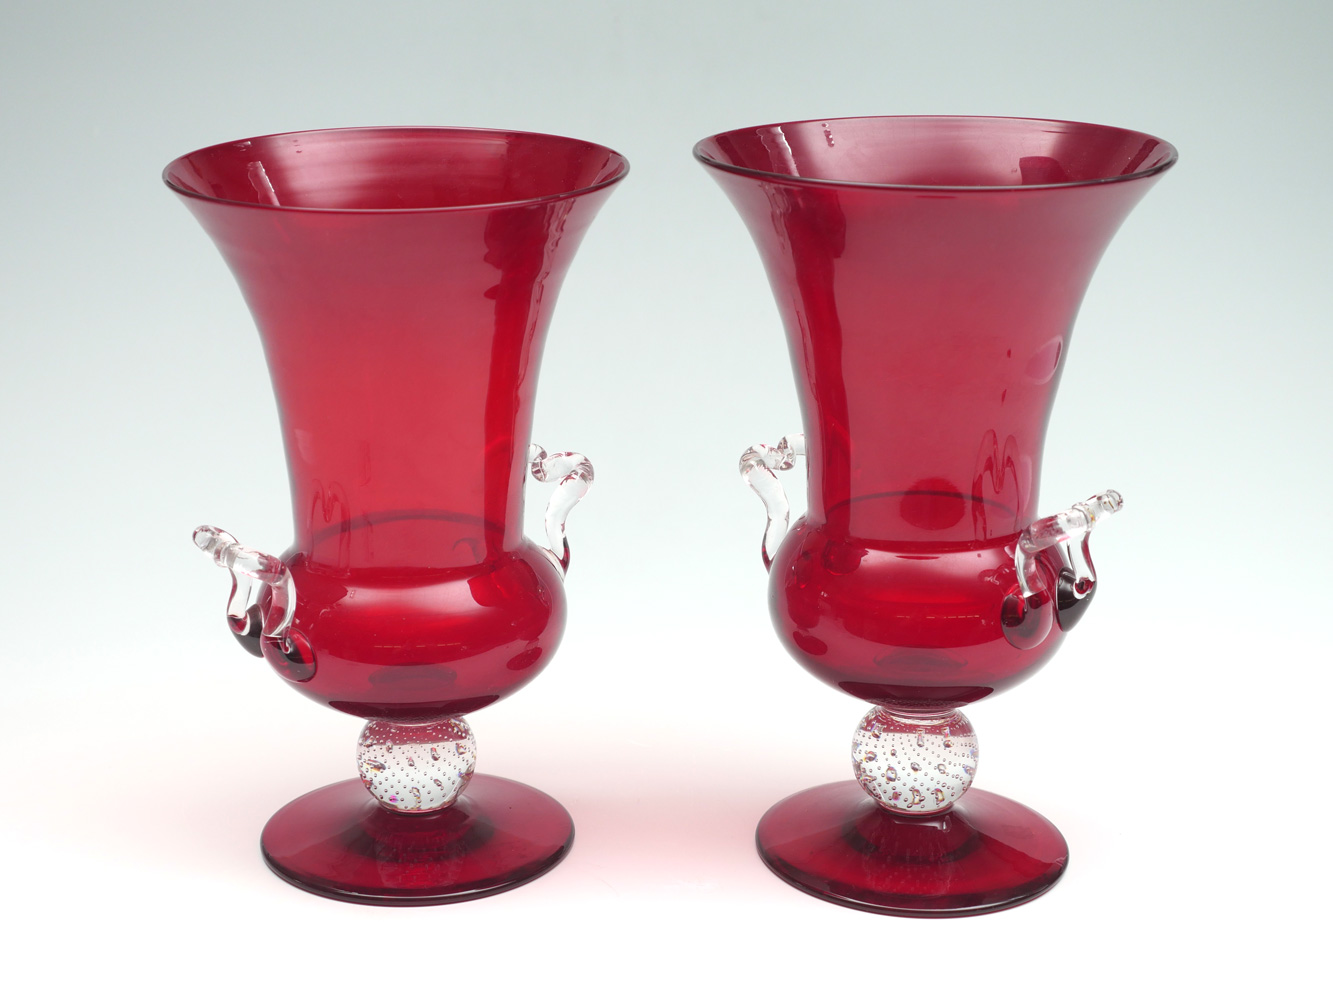 PAIR OF RED STEUBEN VASES 2 Large 36d509